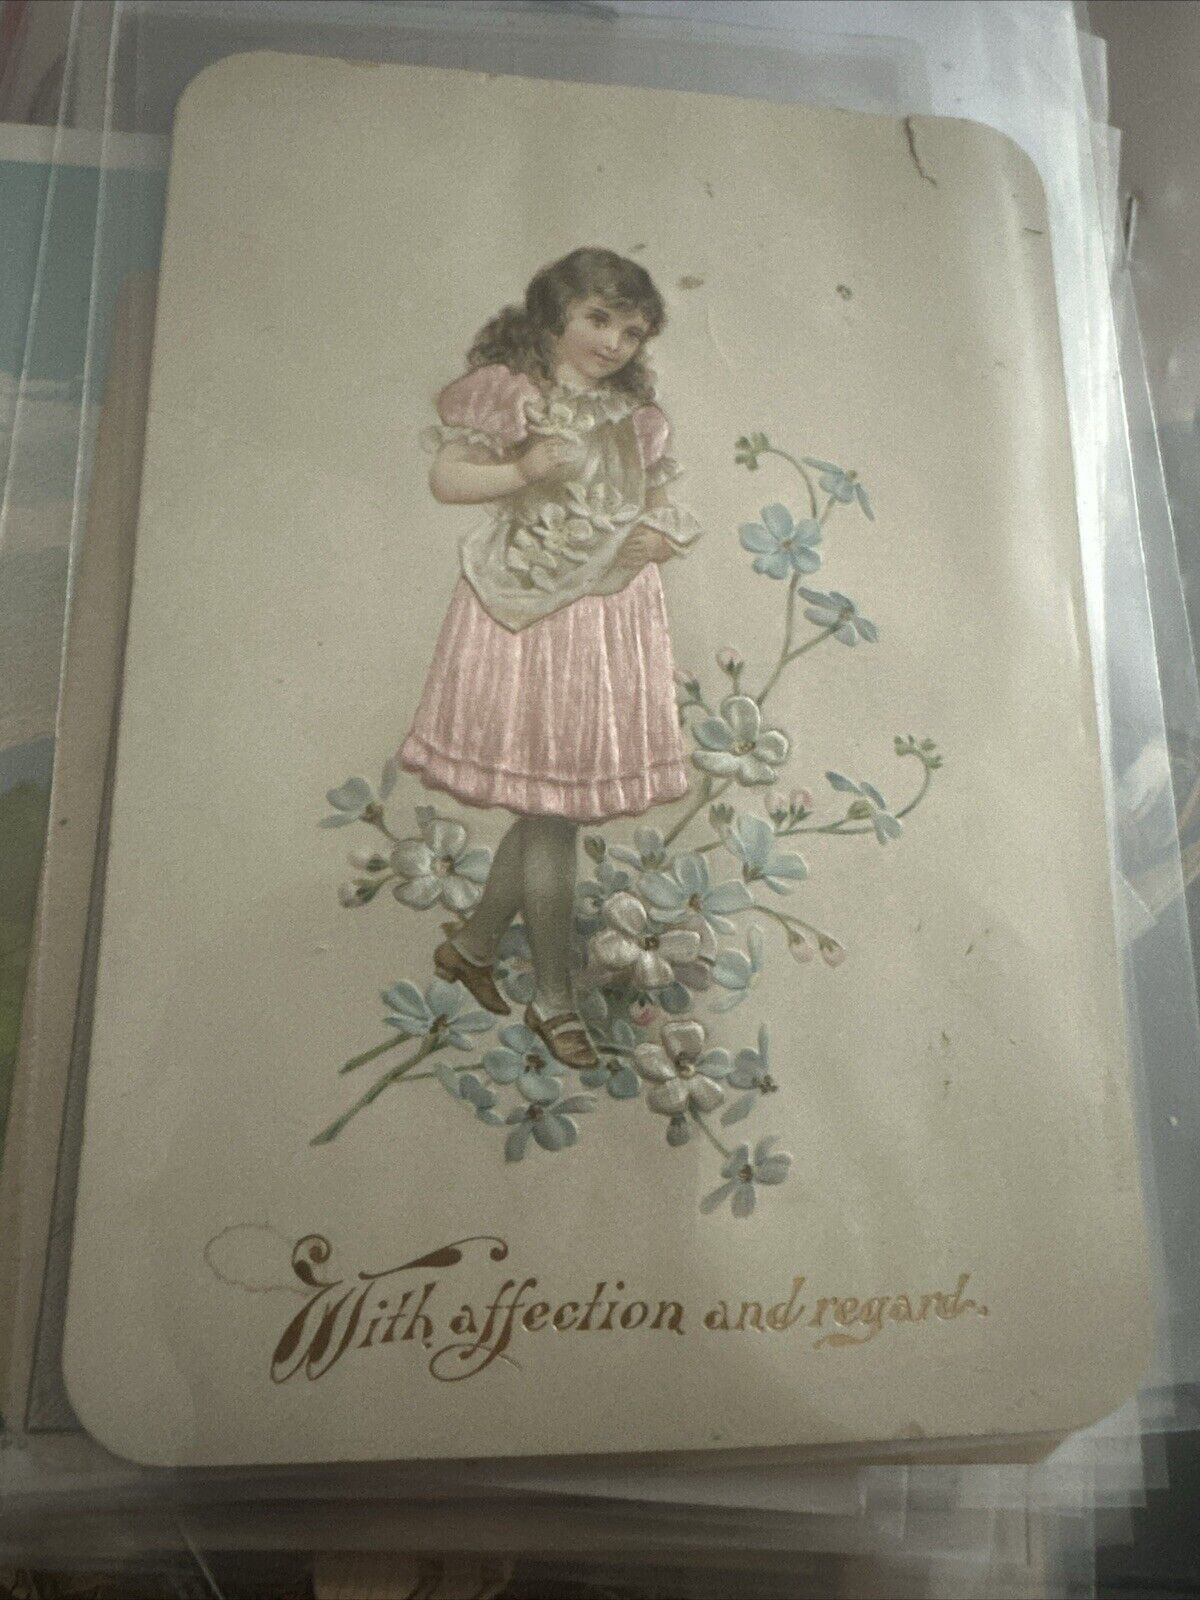 VICTORIAN TRADE CARD   With Affection And Regards